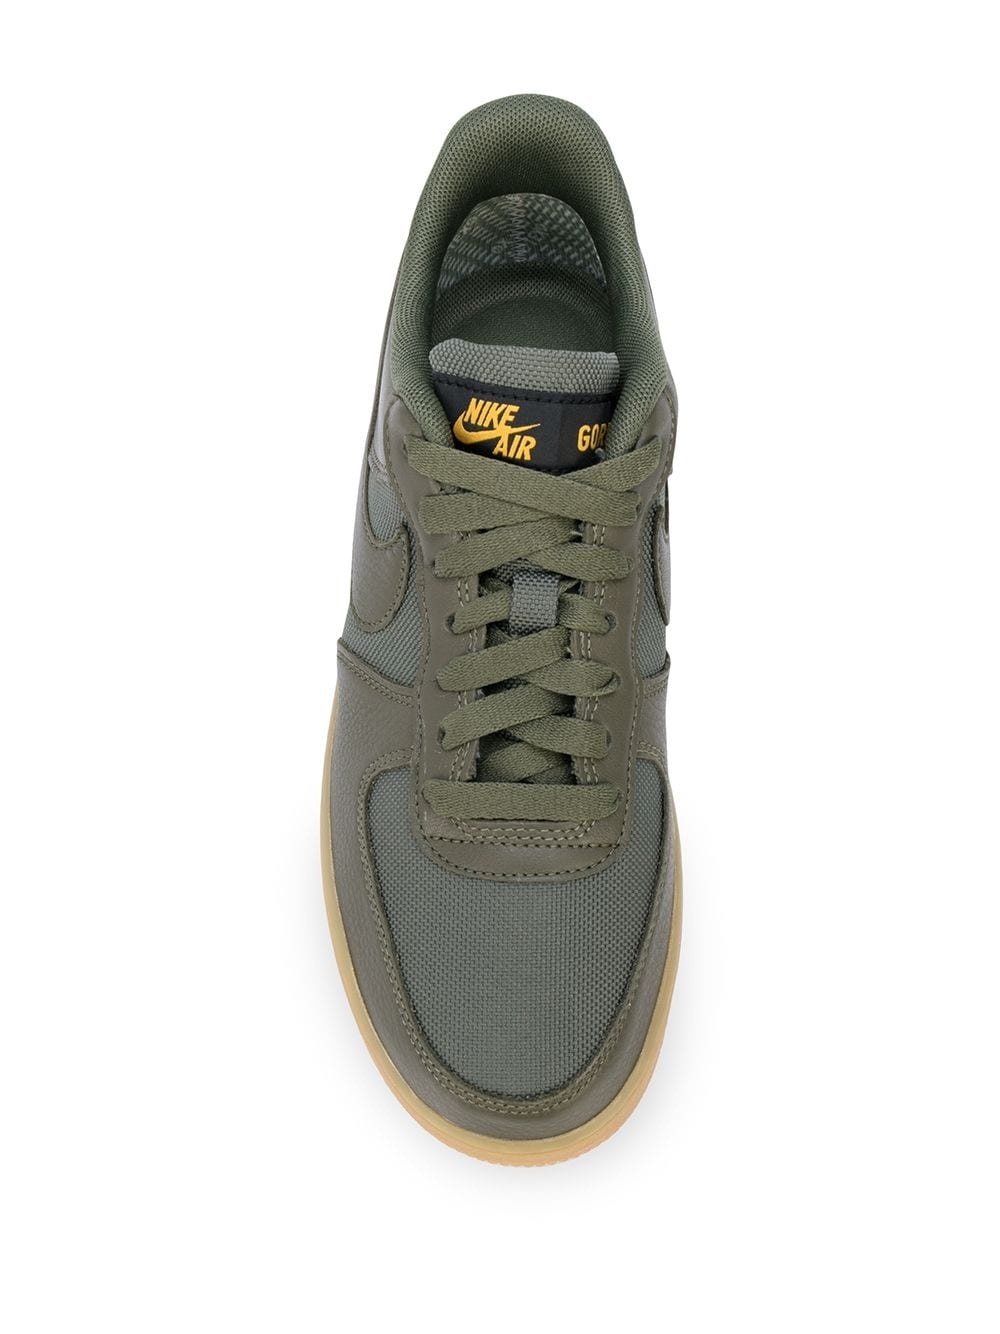 Air Force 1 GORE-TEX "Olive" sneakers - 4